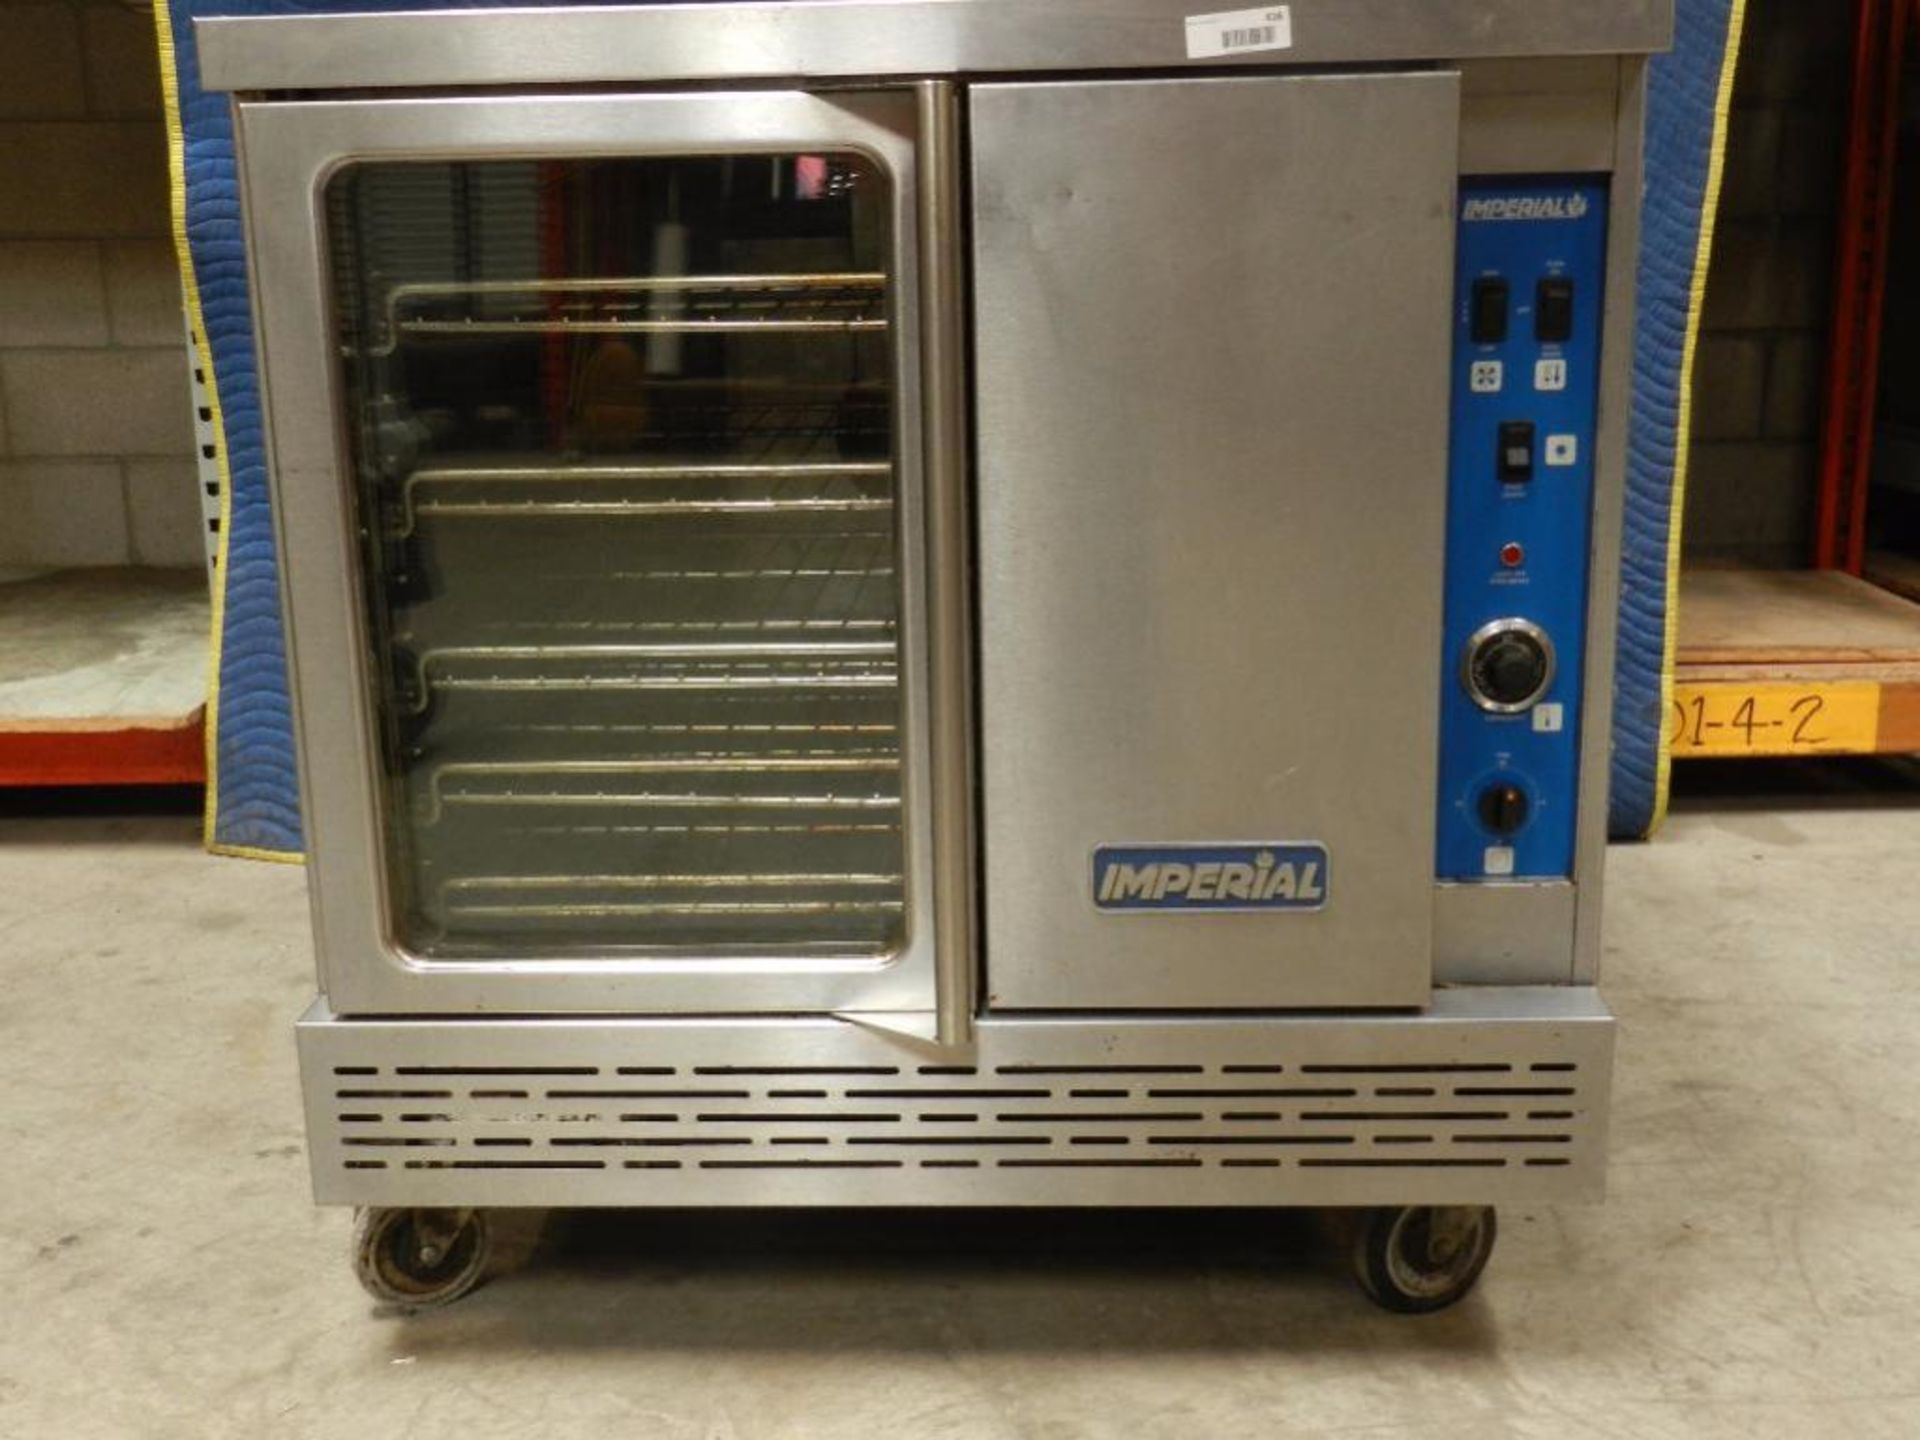 Oven. Convection Oven. Imperial make. Stainless Steel Model ____ Single Dr. Approx Size 4ft. x 3 ft.